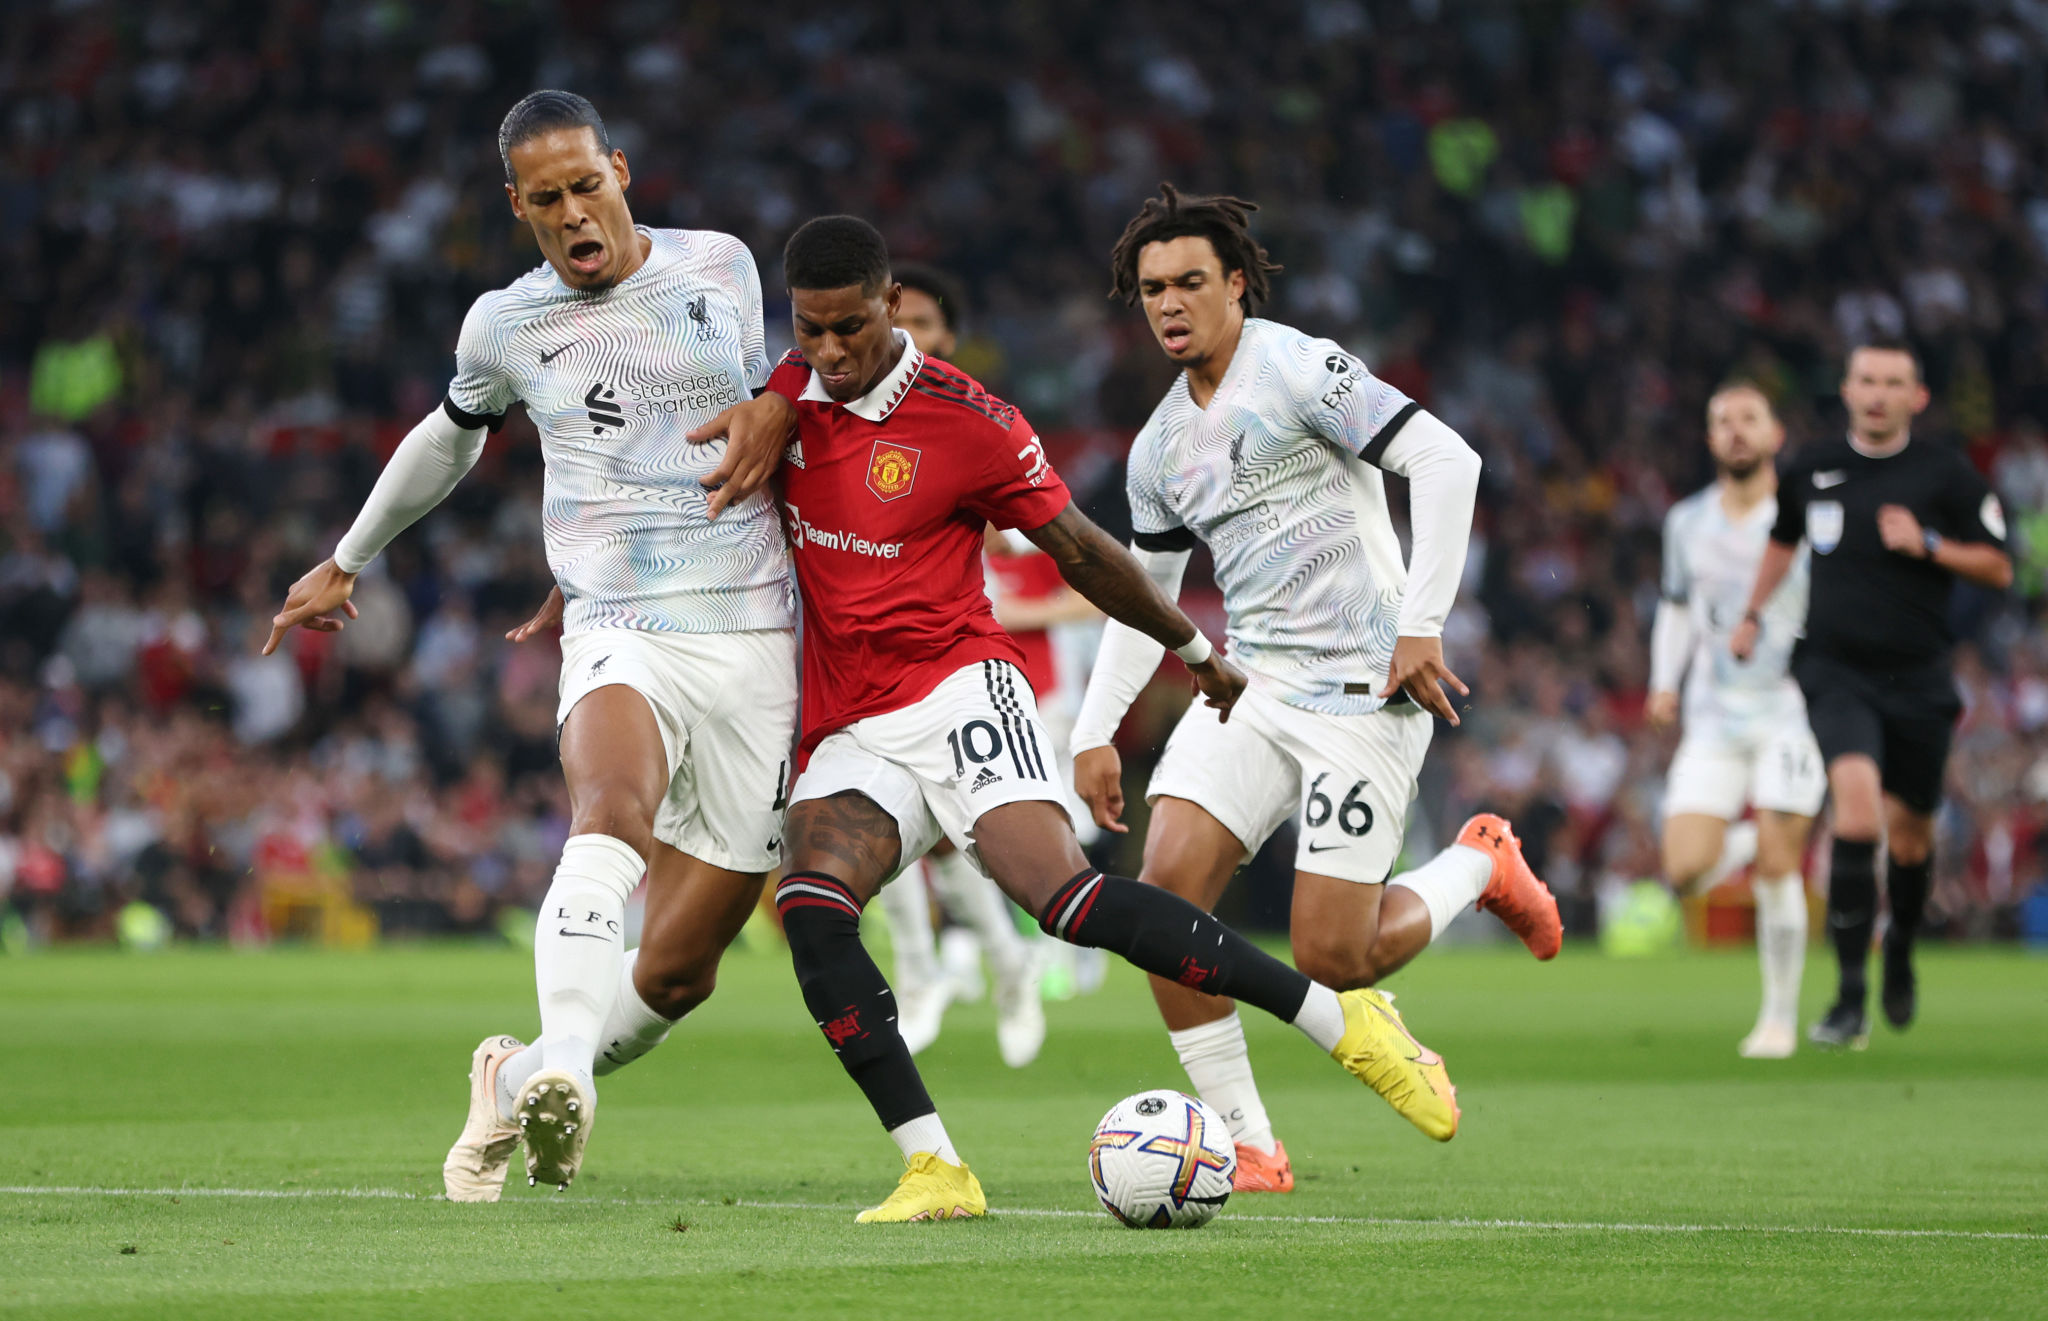 Man United vs Liverpool Highlights: MUN 2-1 LIV, Erik ten Hag claims first victory as Red Devils beat Liverpool in a feisty 2-1 win, Marcus Rashford with the winning goal, Check Manchester United beat Liverpool HIGHLIGHTS